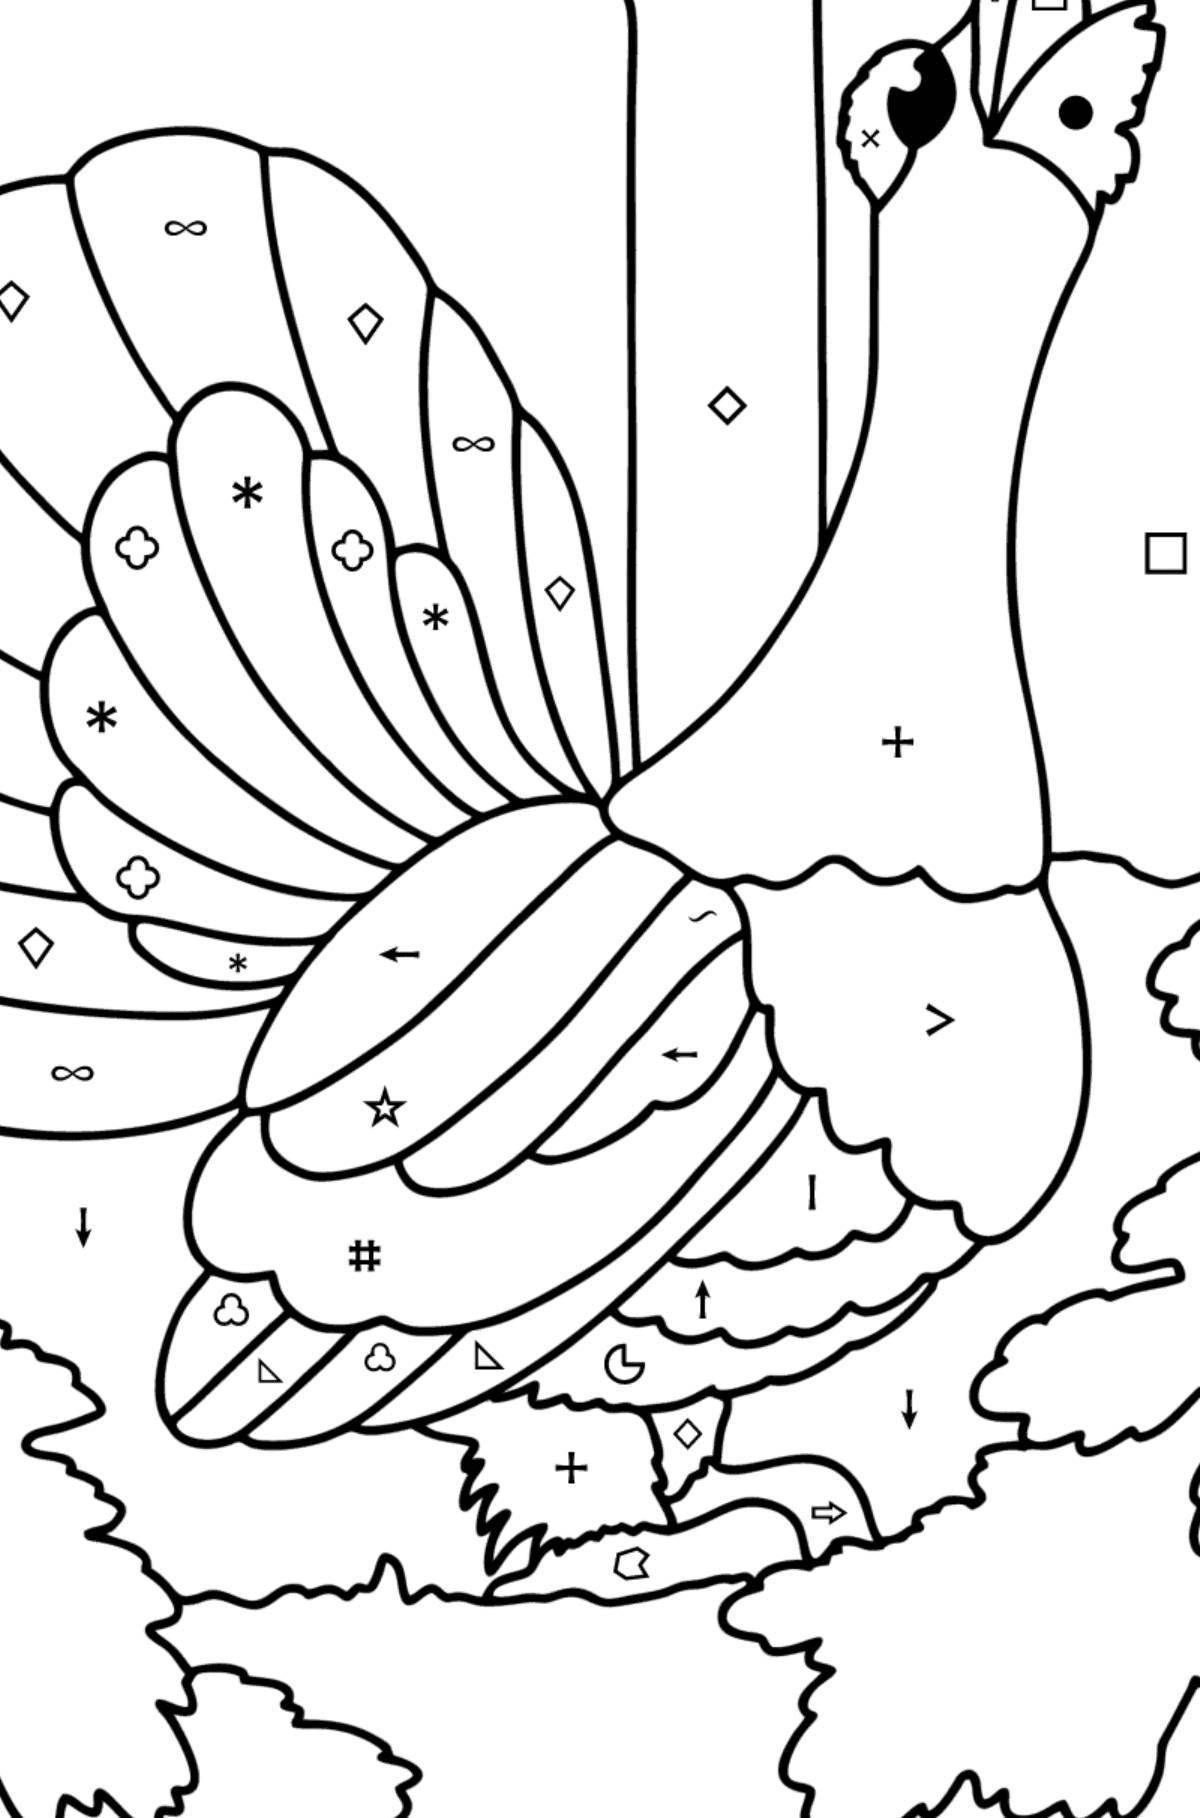 Coloring capercaillie for children